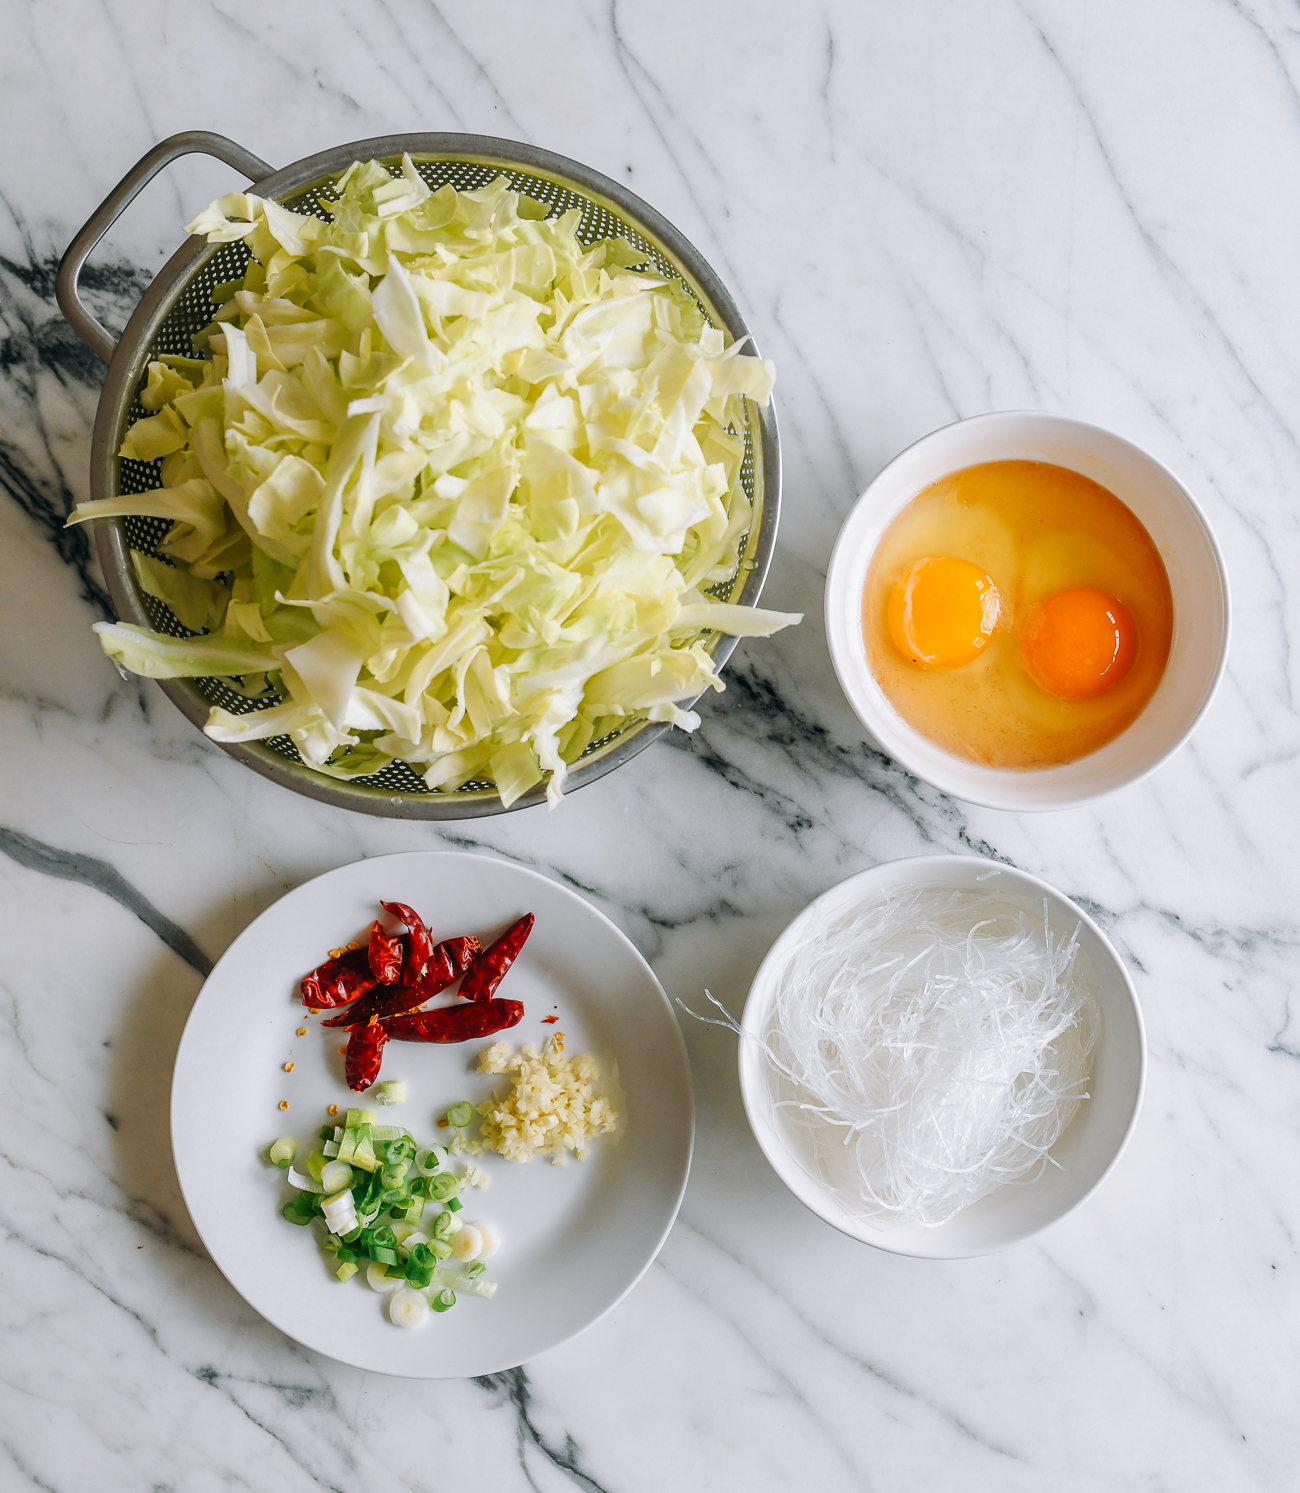 Ingredients for cabbage stir-fry